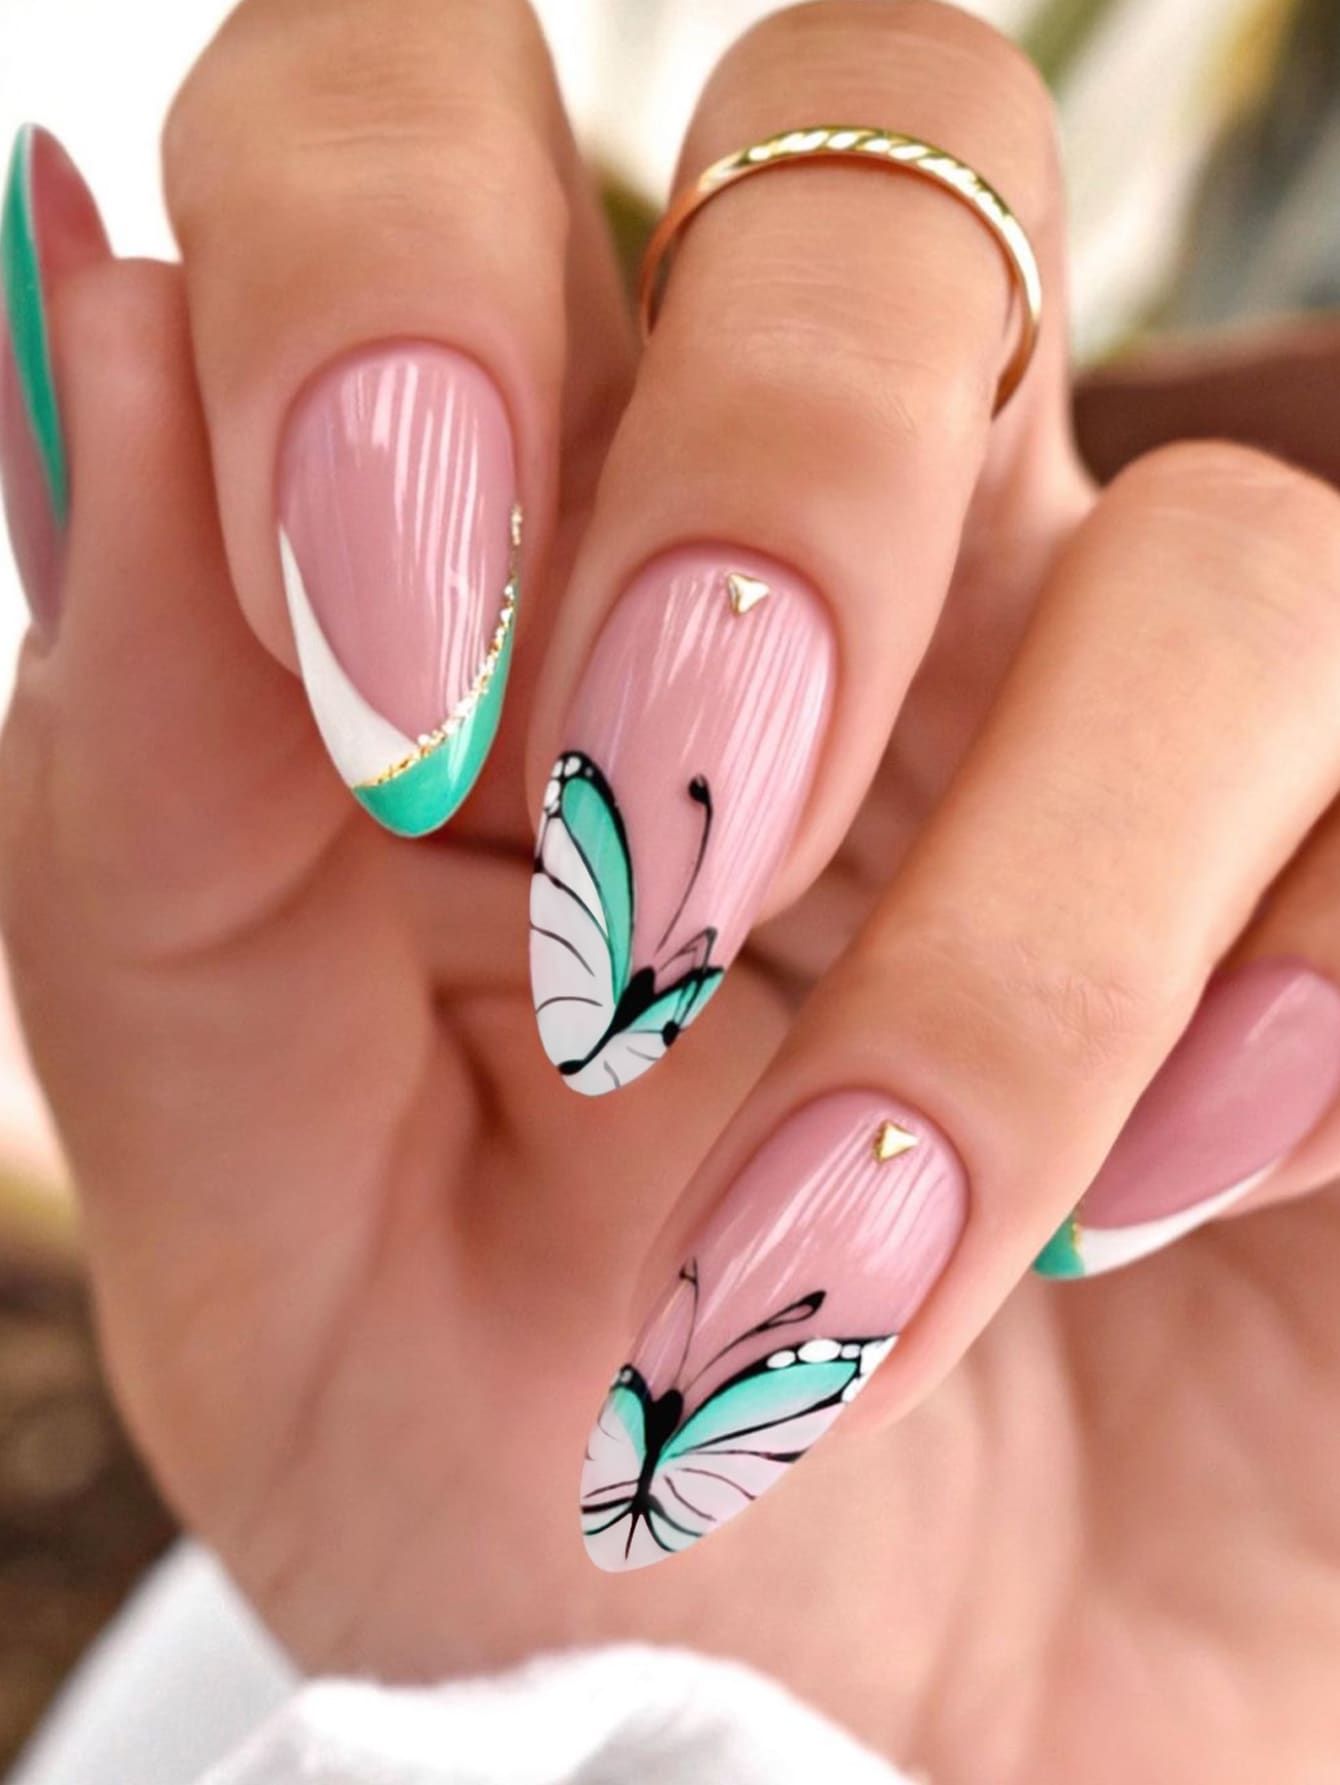 Get trendy butterfly nails at home with these 6 top-rated products